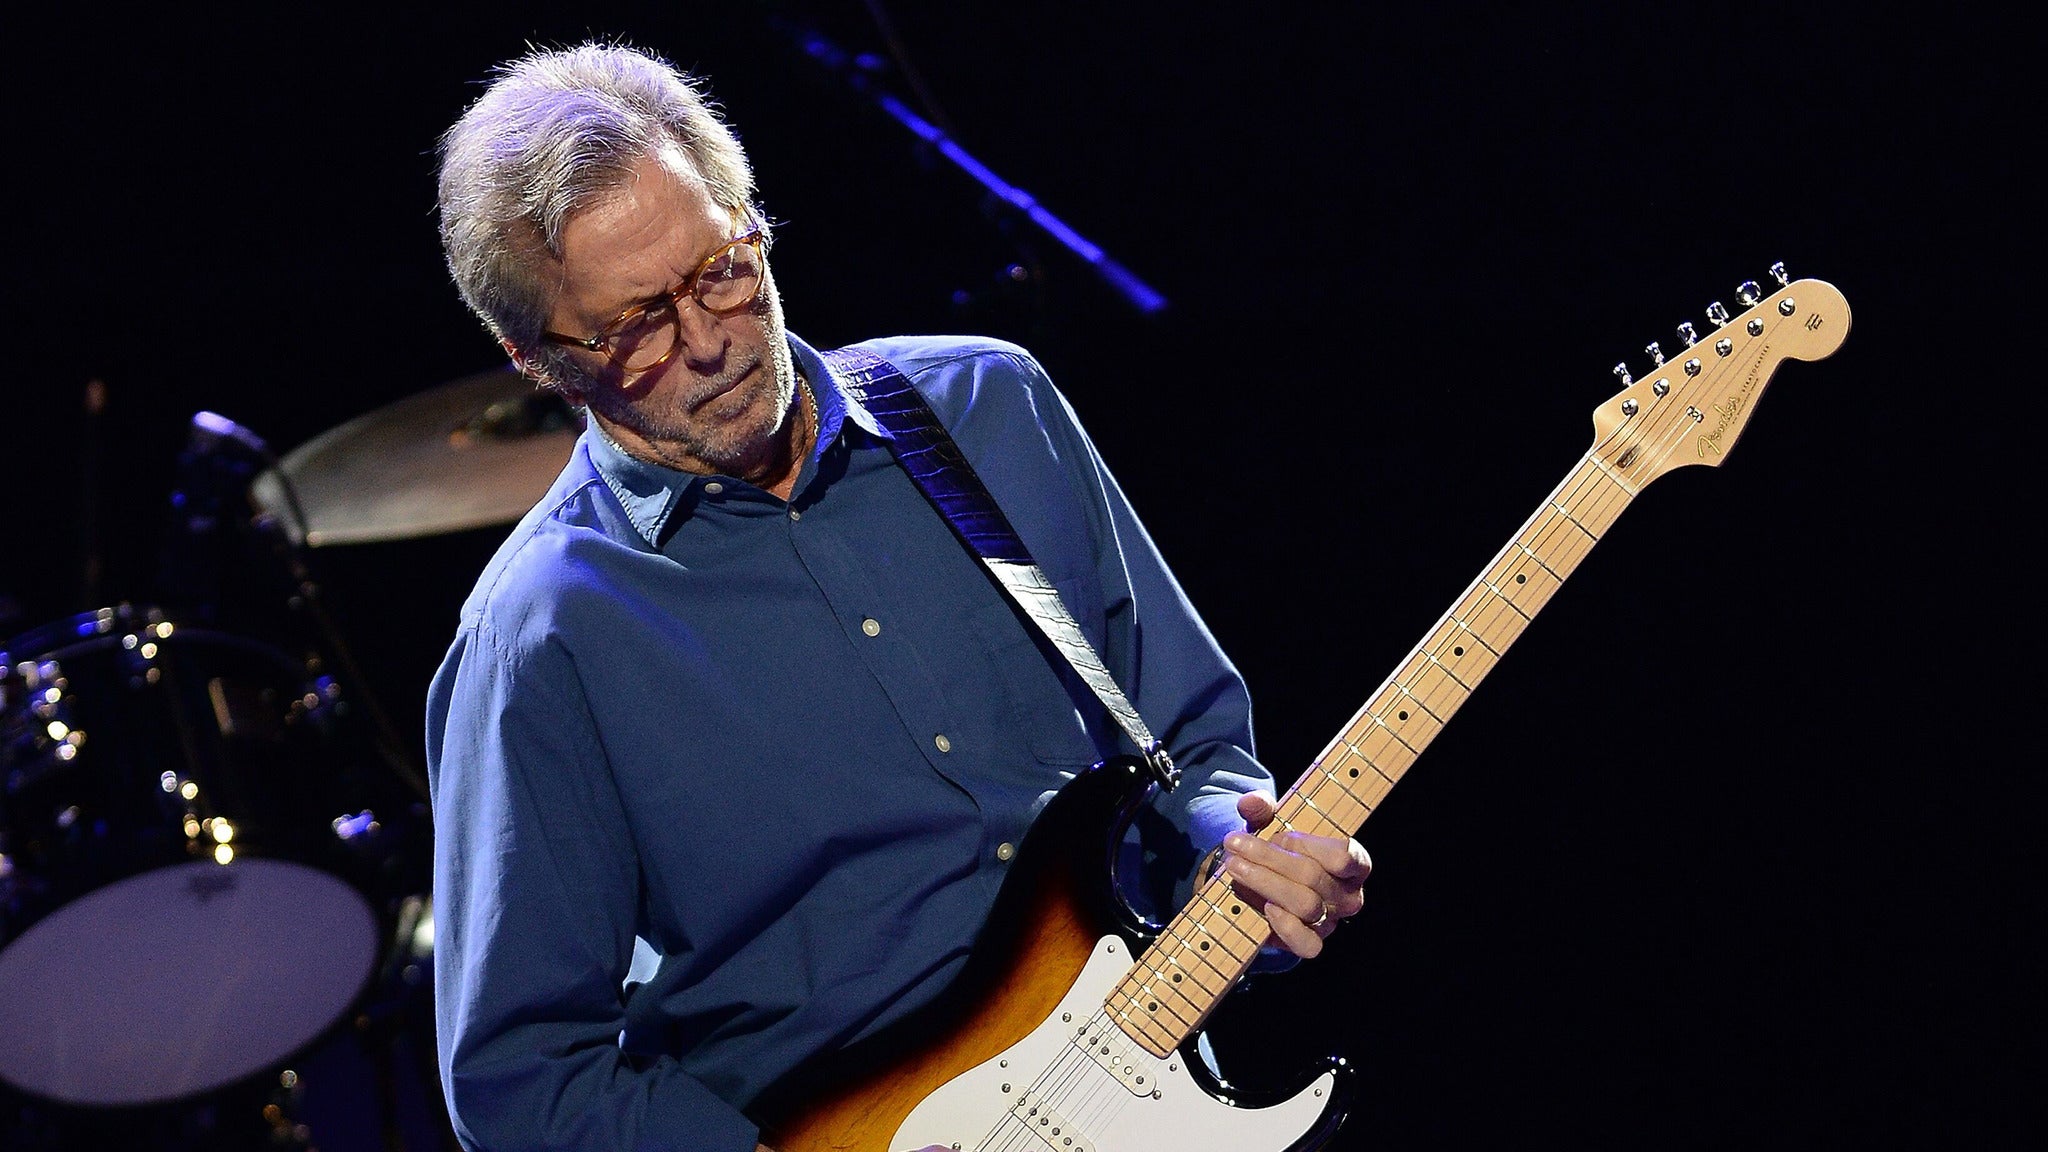 working presale code for Eric Clapton affordable tickets in Toronto